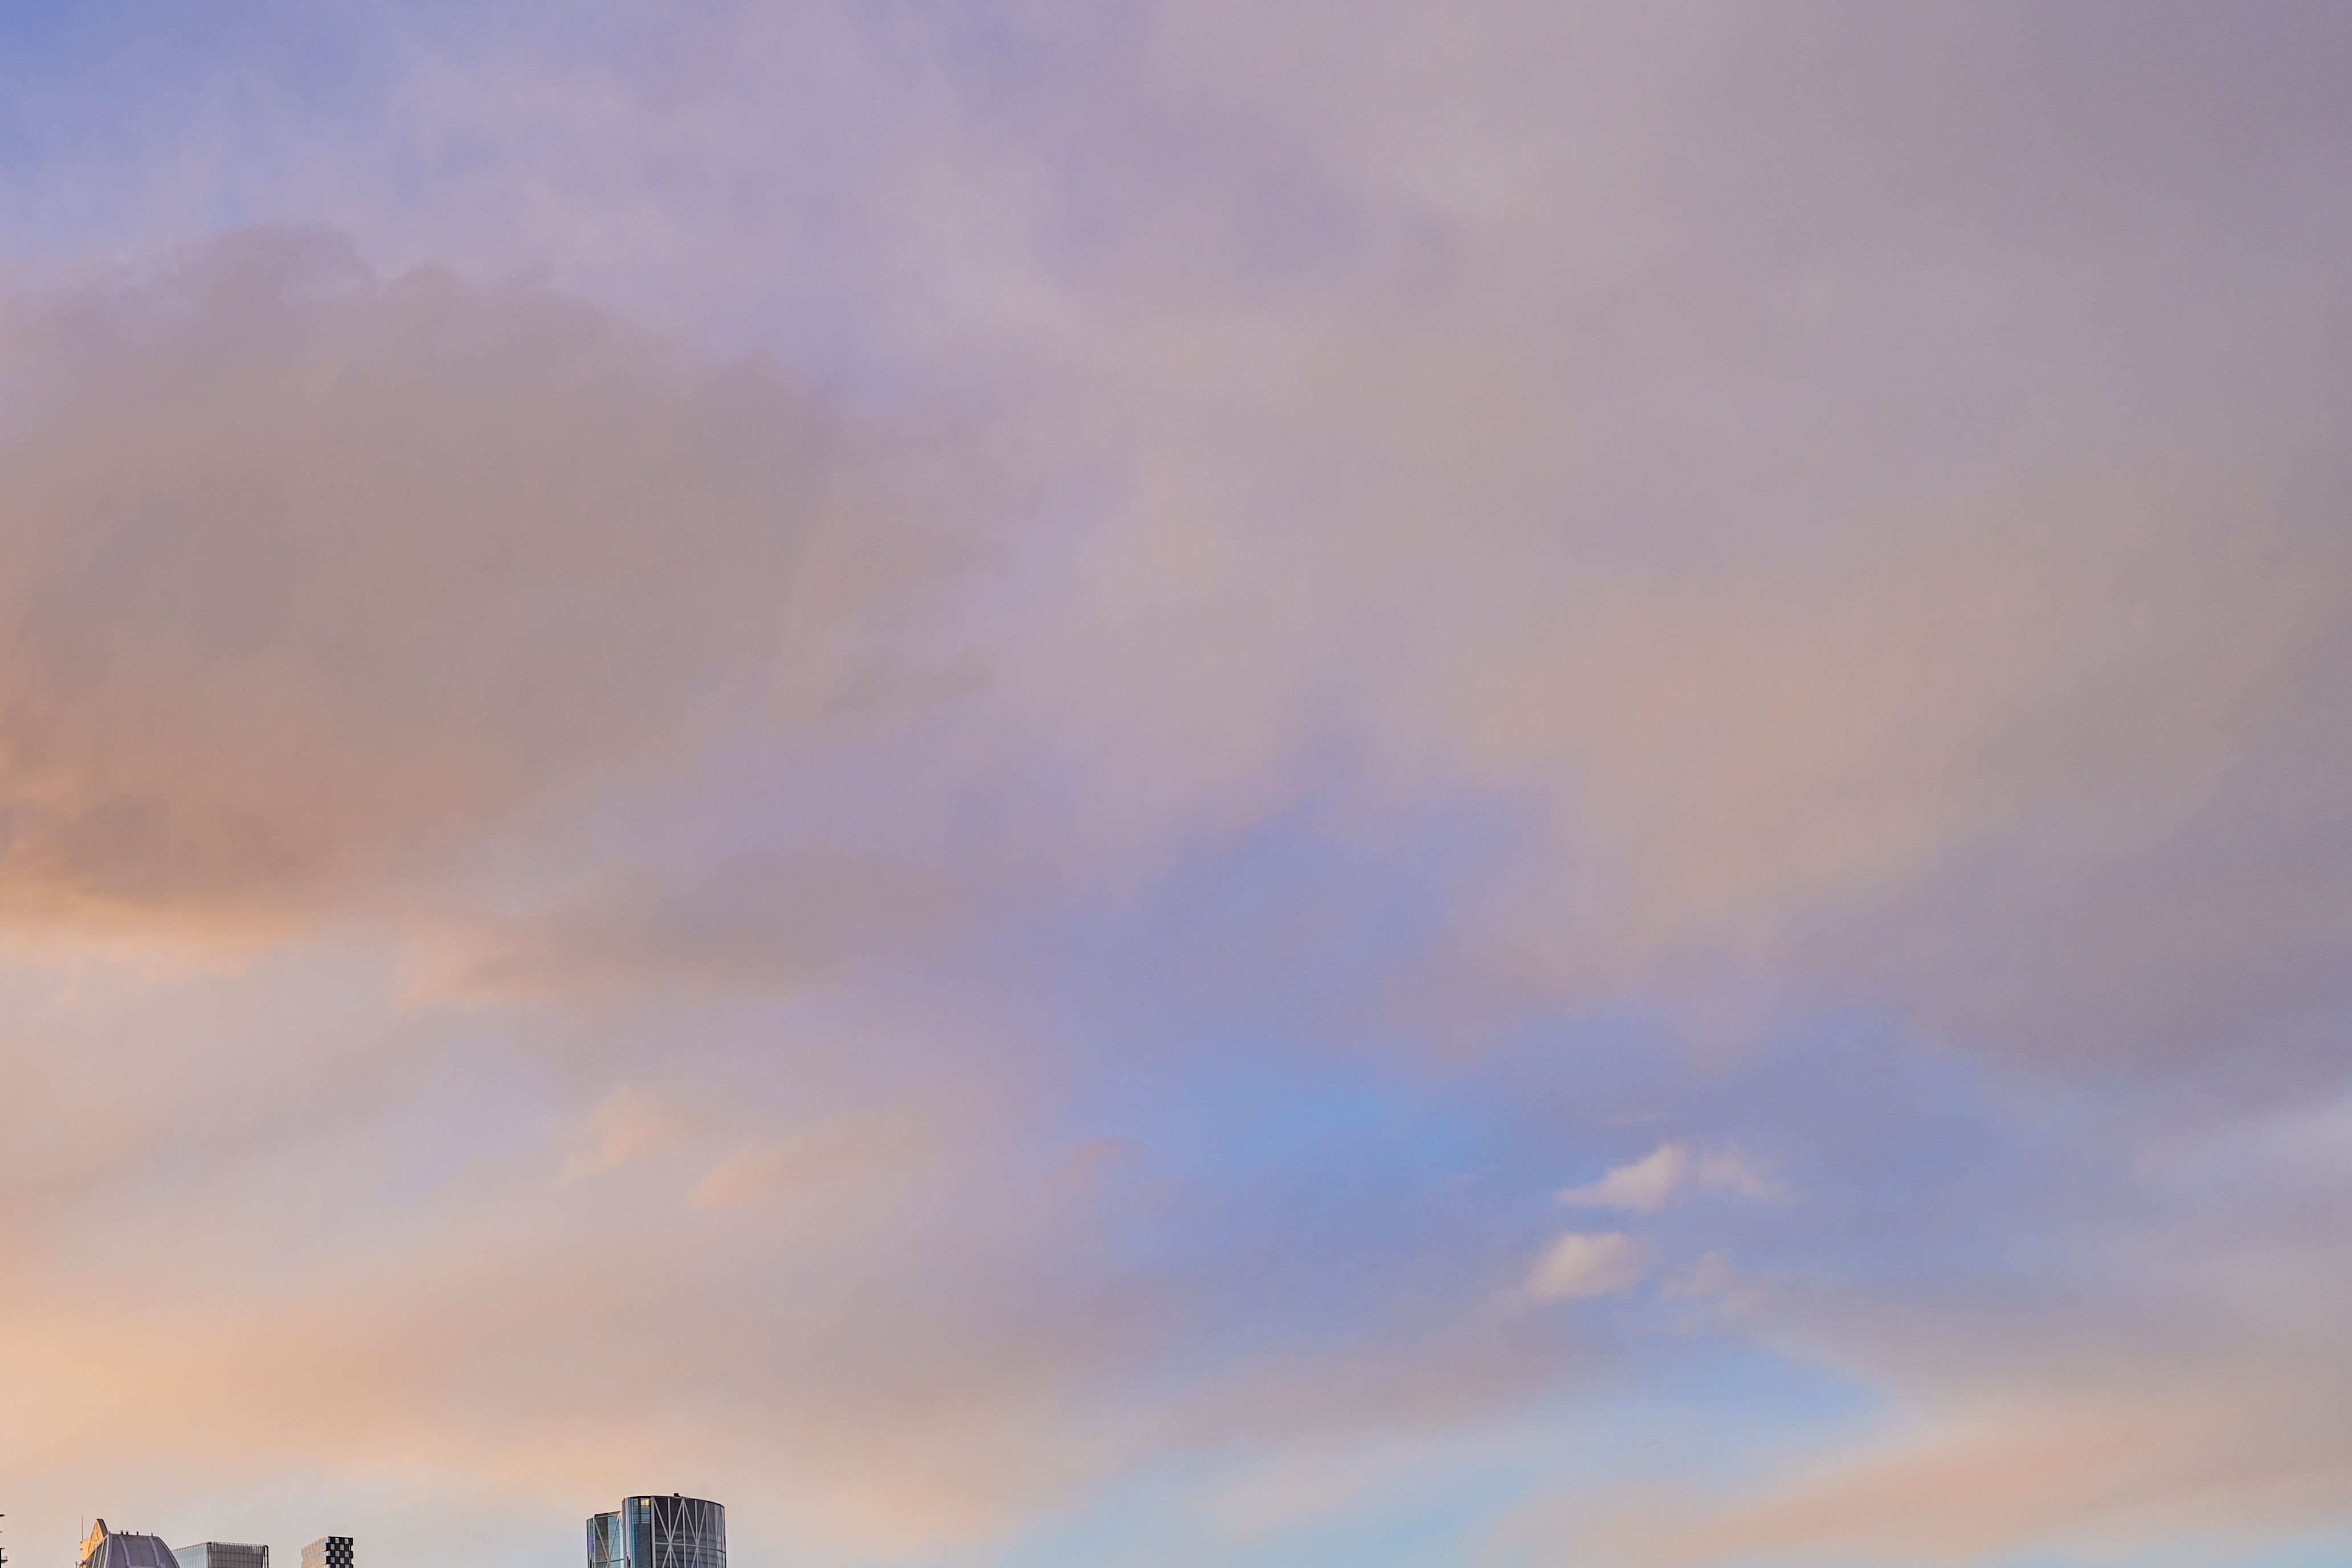 A photograph of the Calgary skyline at sunset during the fall.